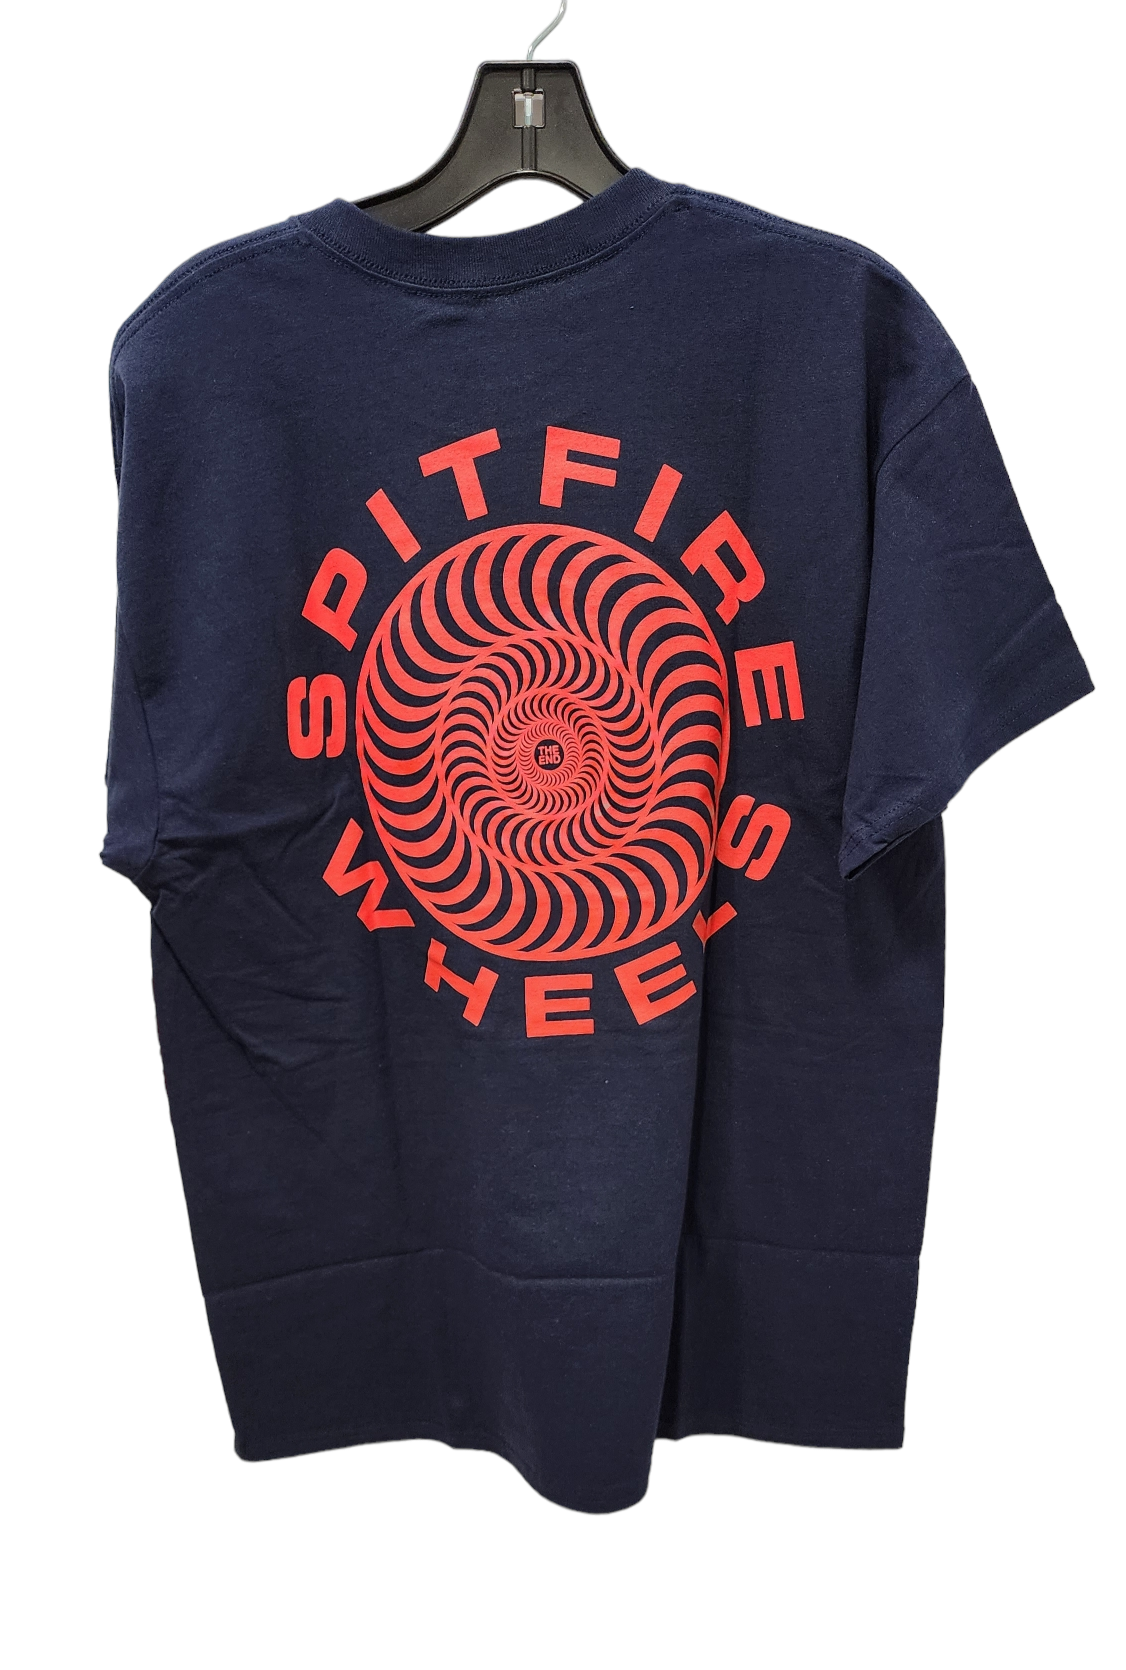 SPITFIRE CLASSIC '87 SWORL SHORT SLEEVE T-SHIRT NAVY WITH RED PRINT